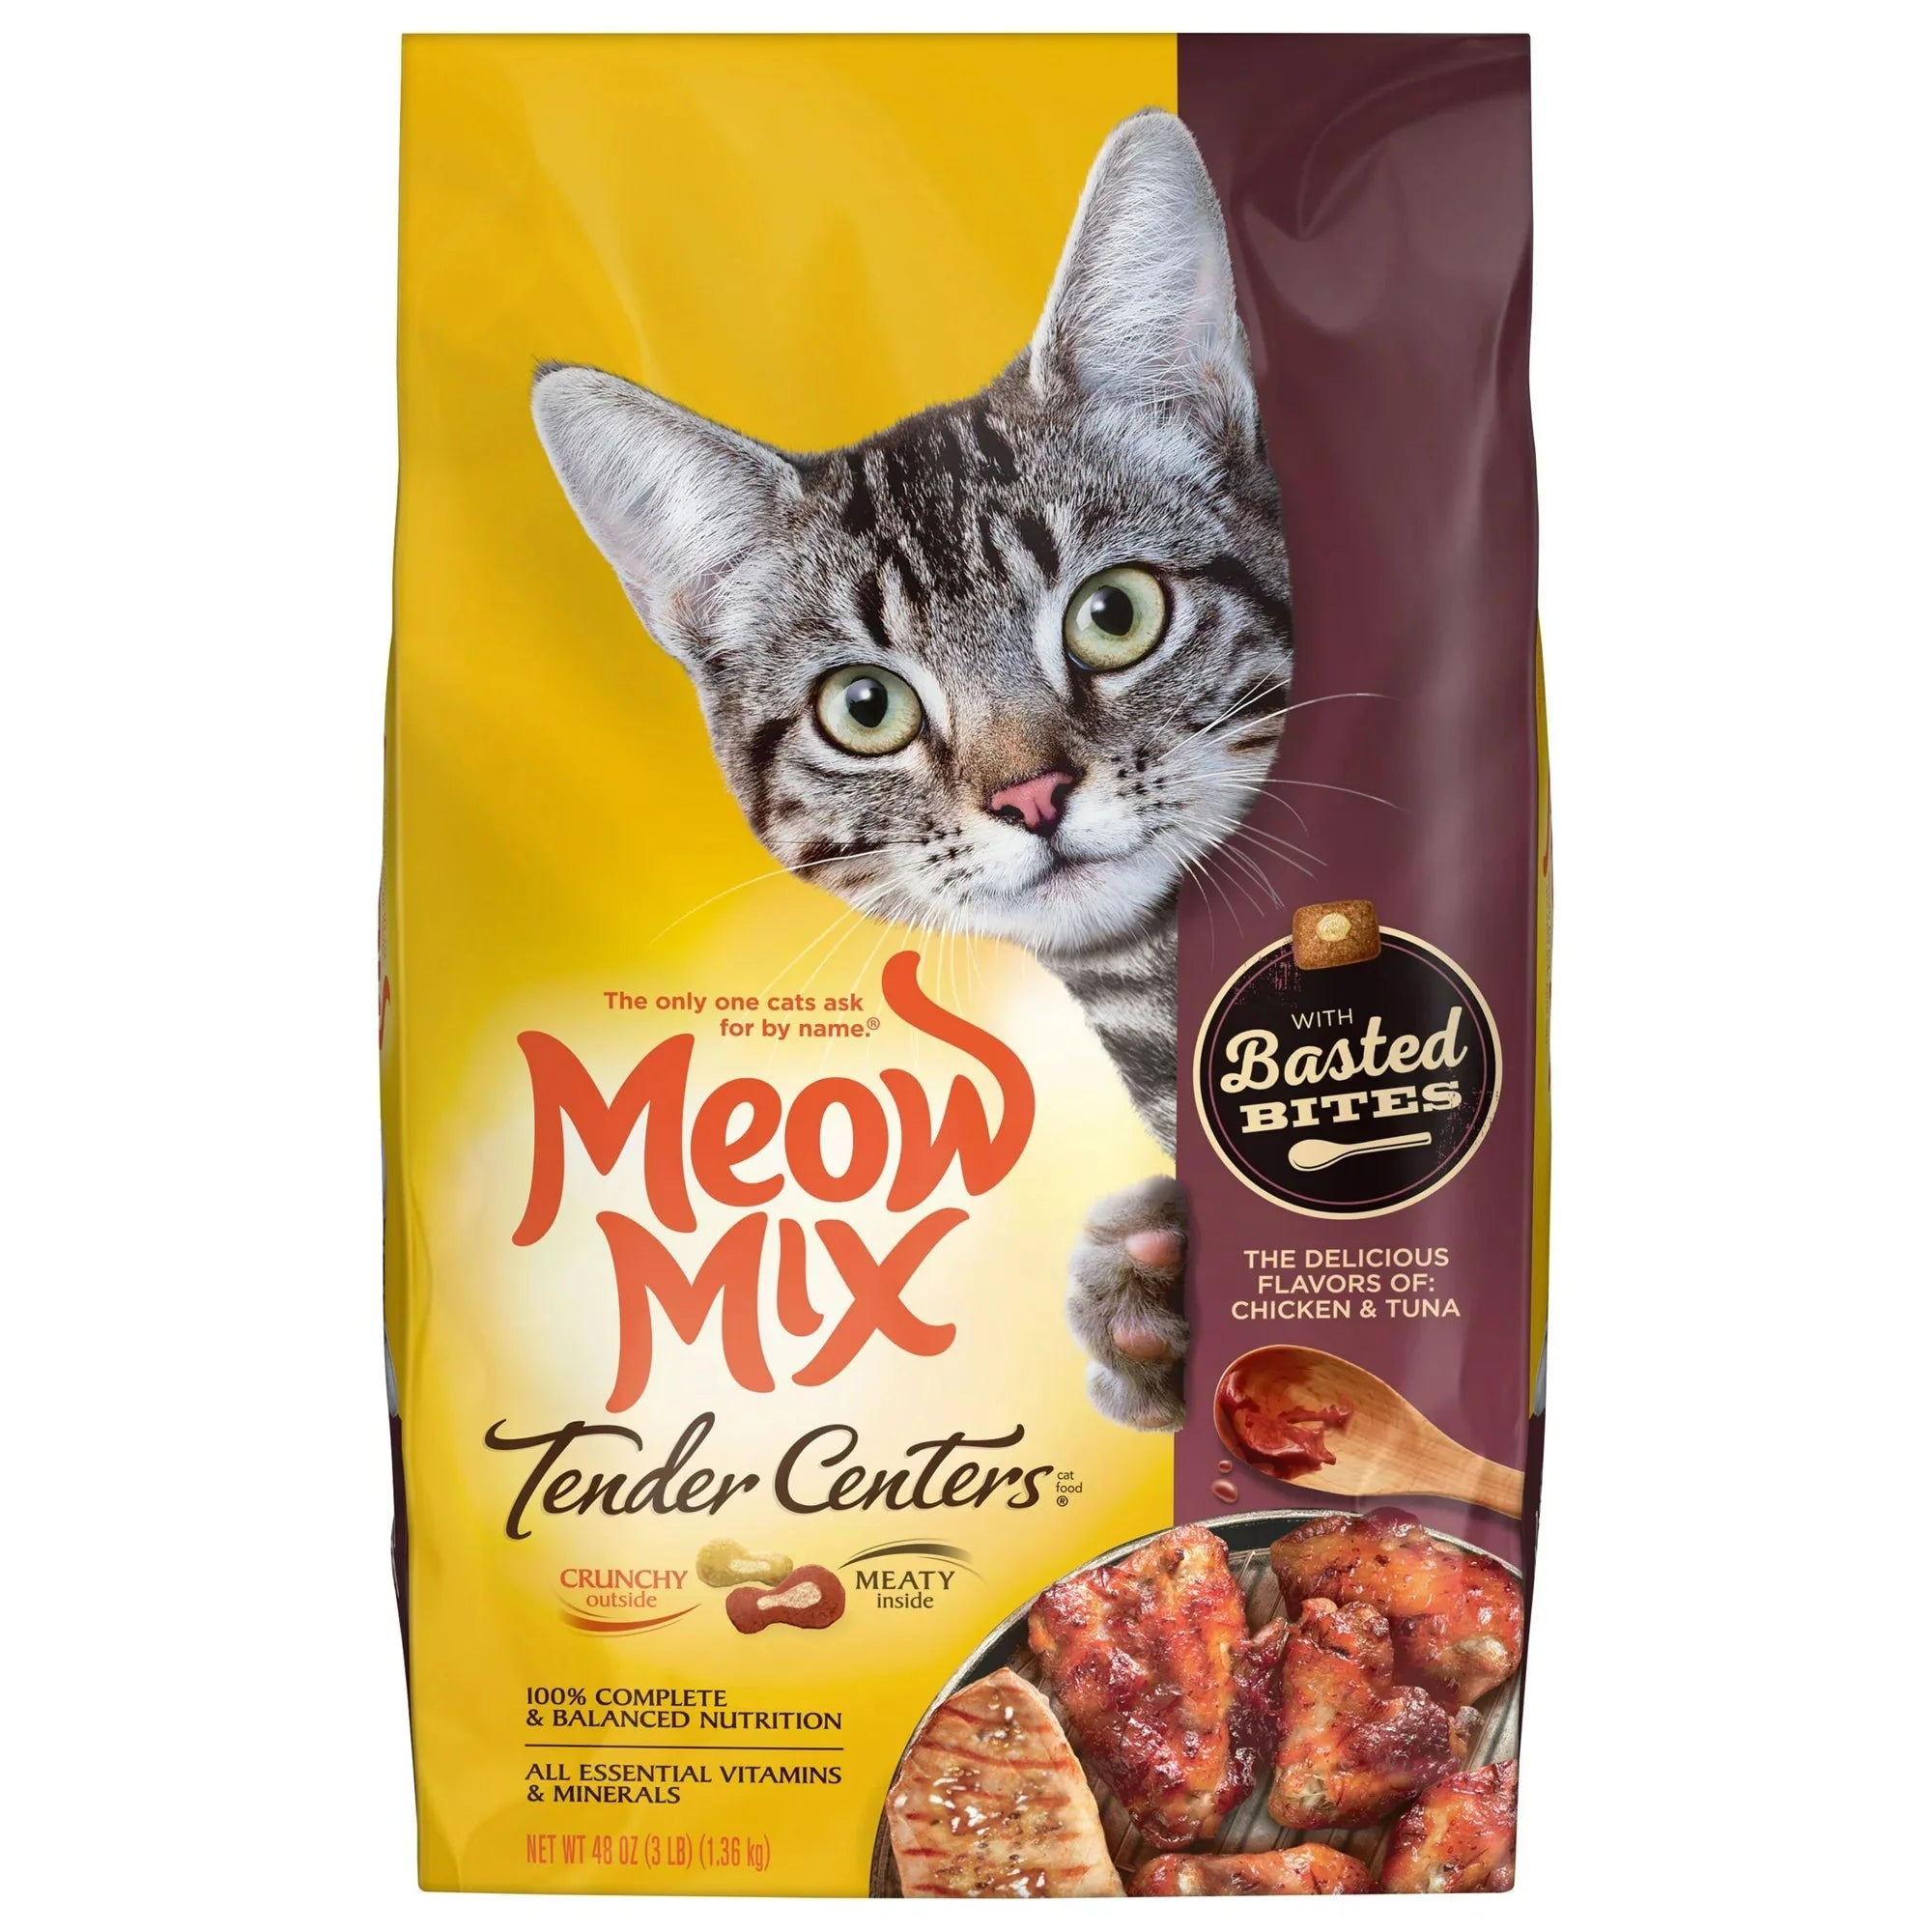 Wholesale prices with free shipping all over United States Meow Mix Tender Centers with Basted Bites, Chicken and Tuna Flavored Dry Cat Food, 3-Pound - Steven Deals